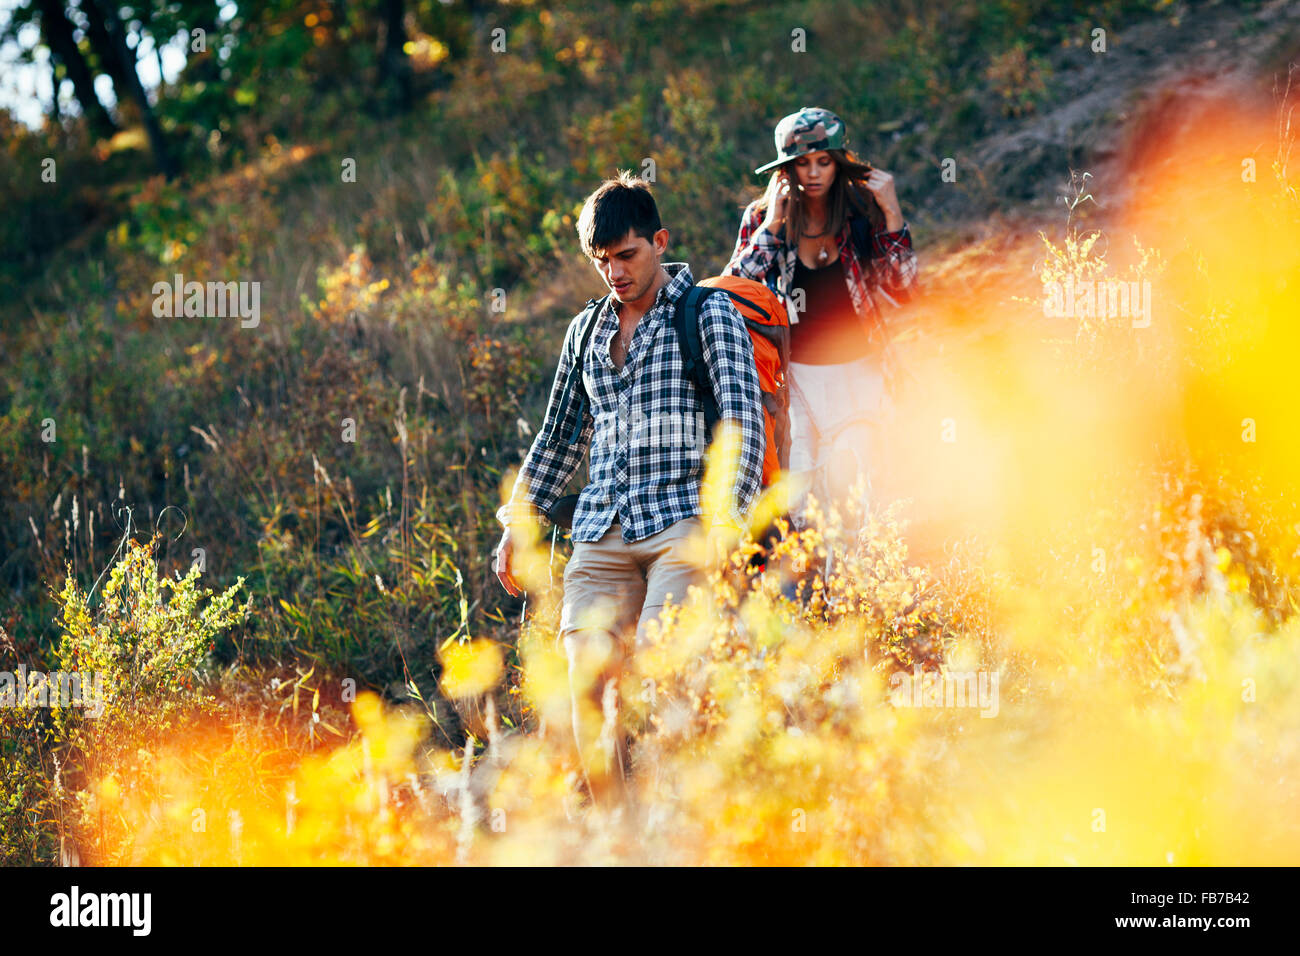 Man and woman hiking in forest Stock Photo